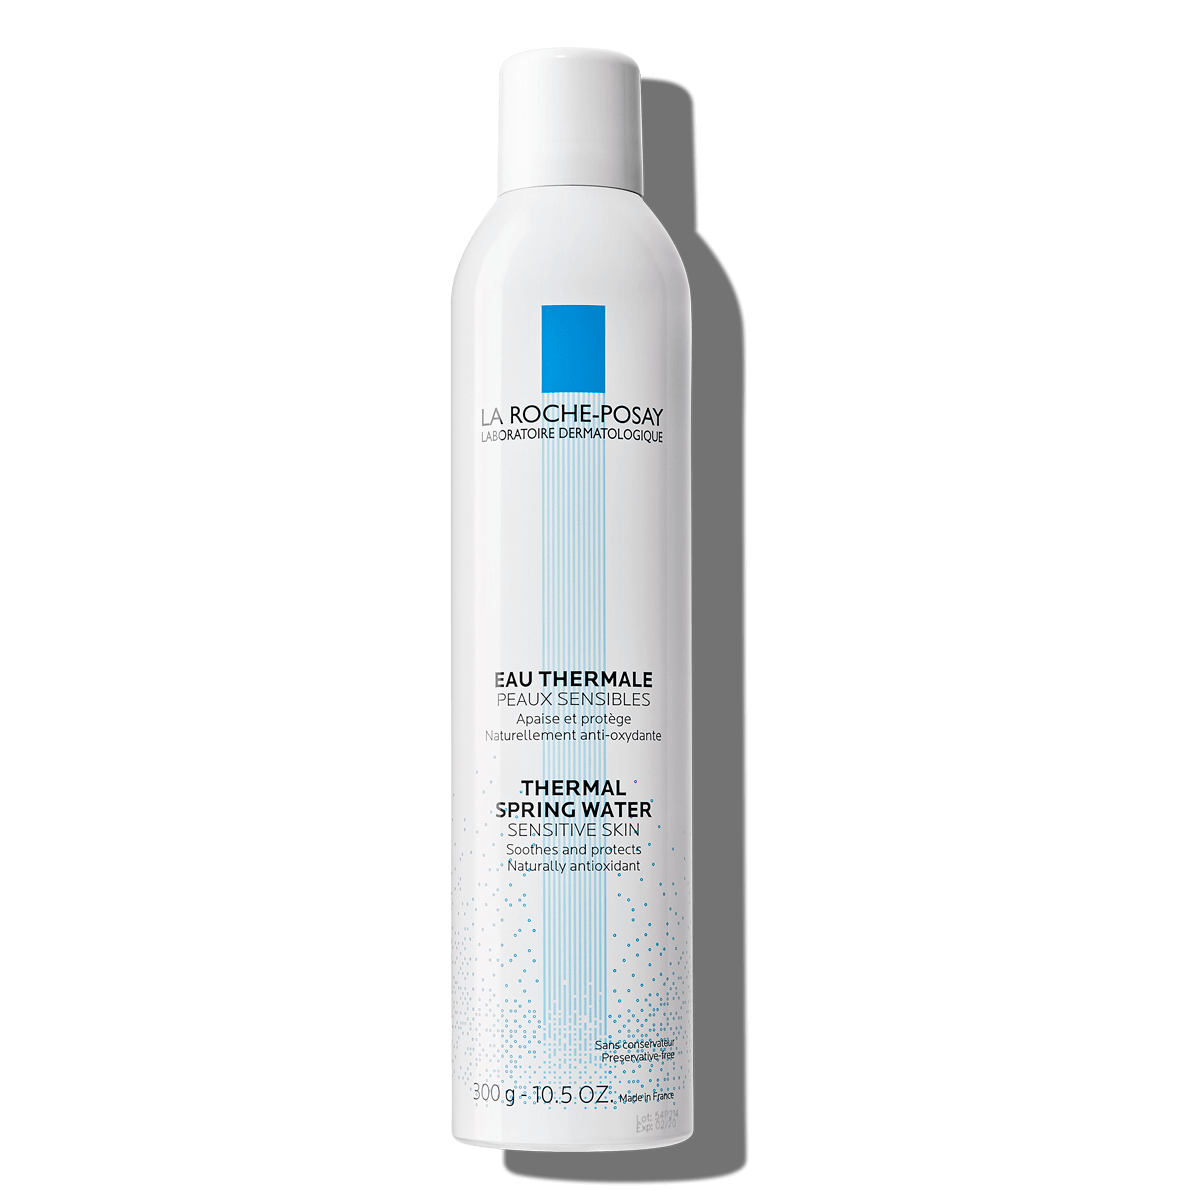 La Roche Posay Thermal Spring Water Eau Thermale